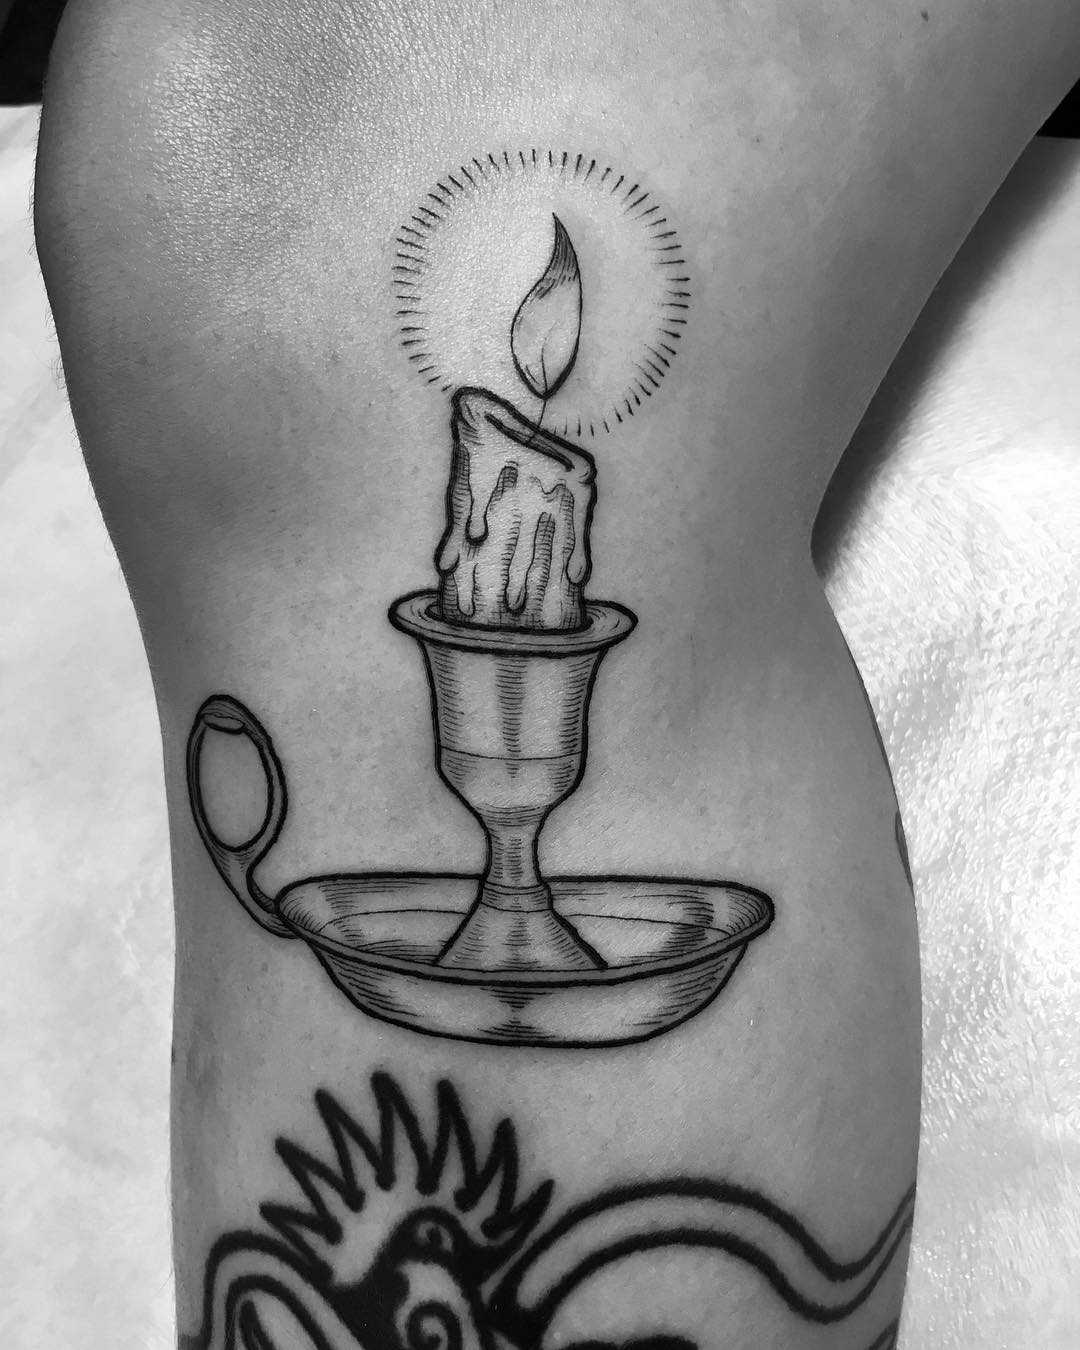 Chandelier and candle tattoo